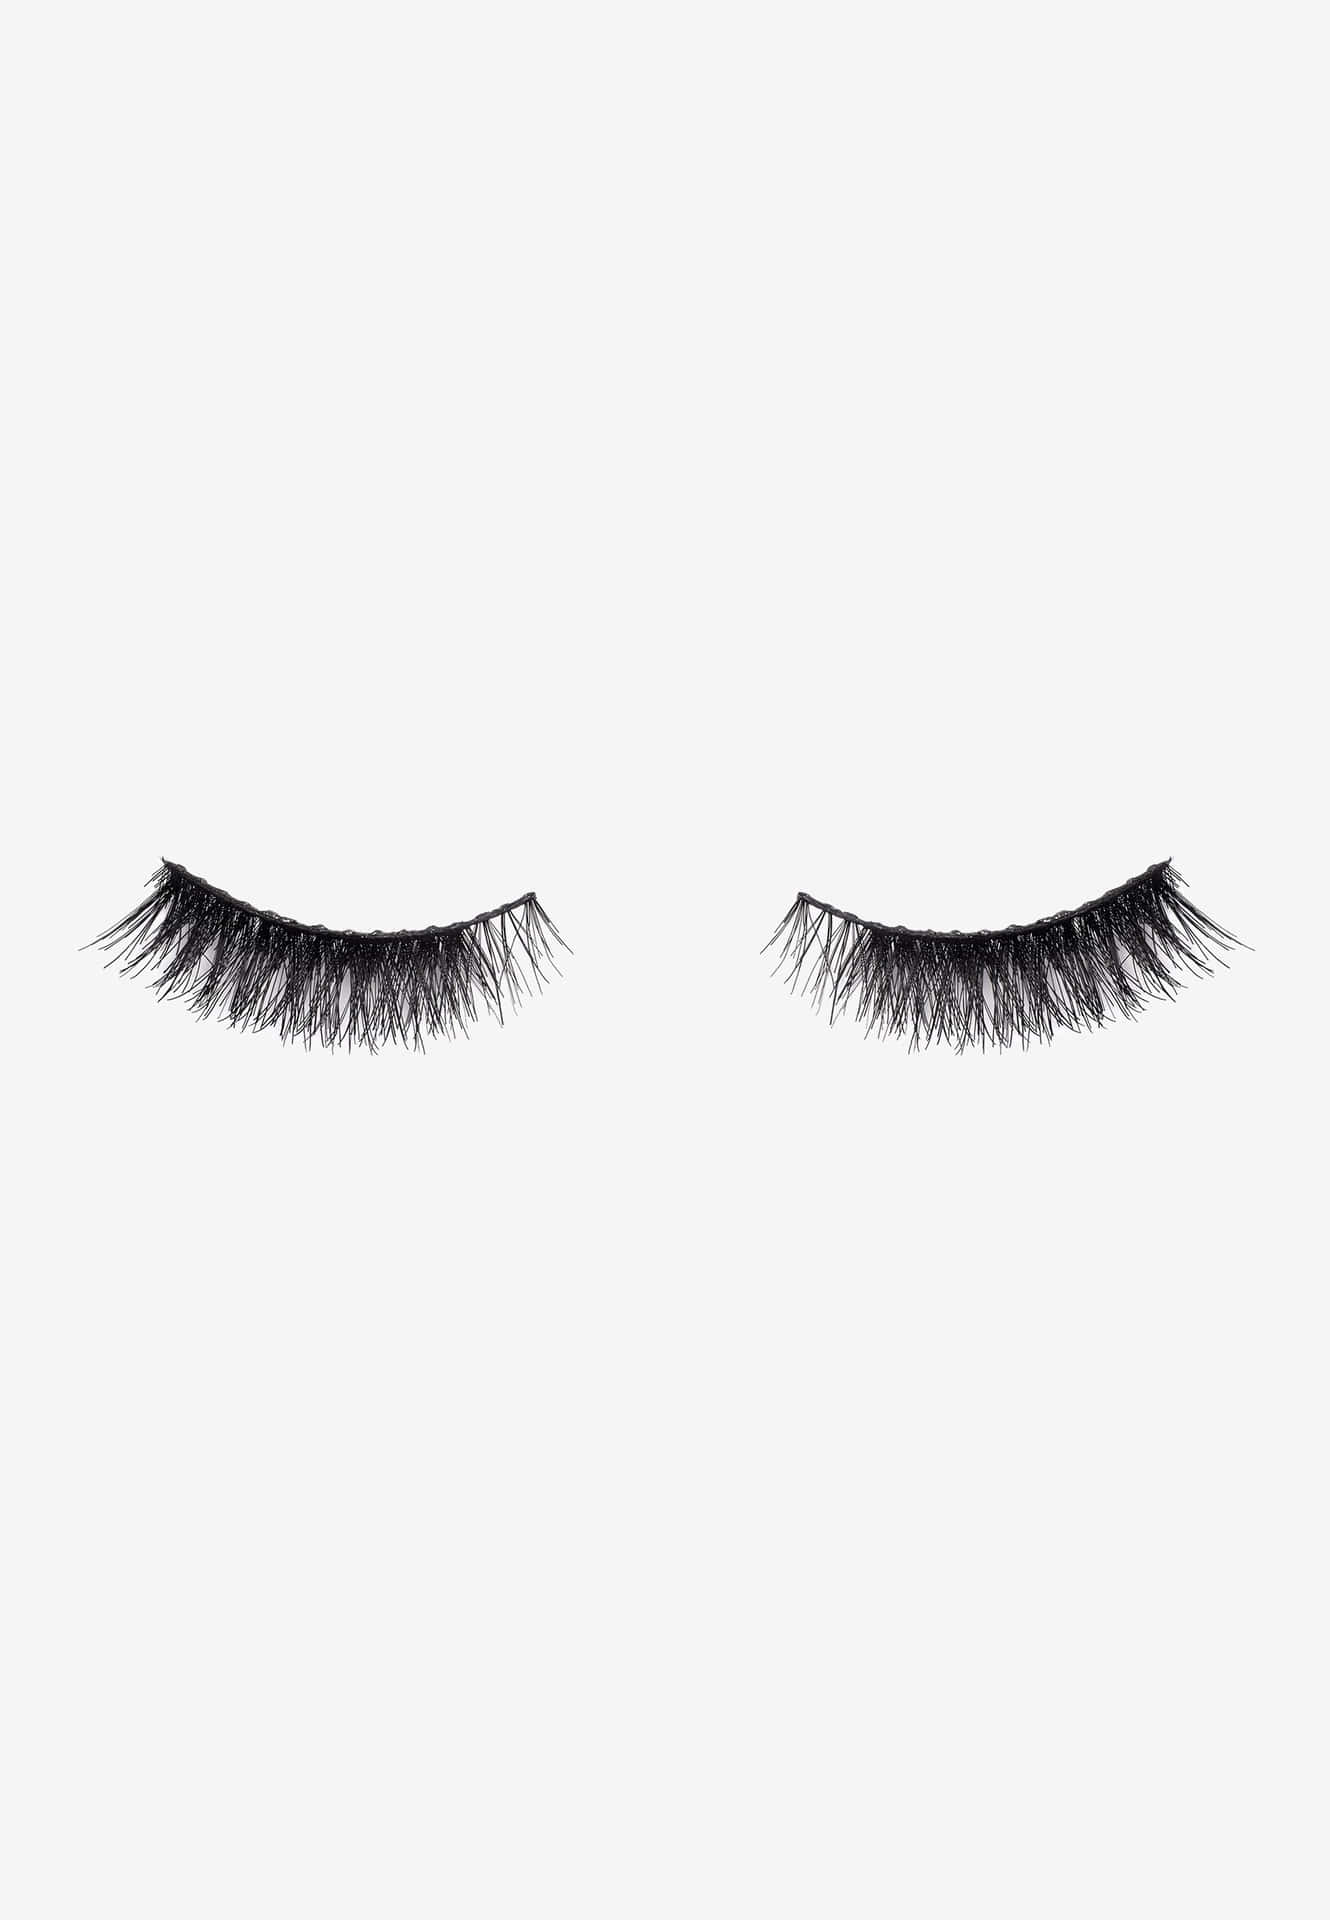 A Pair Of Black Eyelashes On A White Background